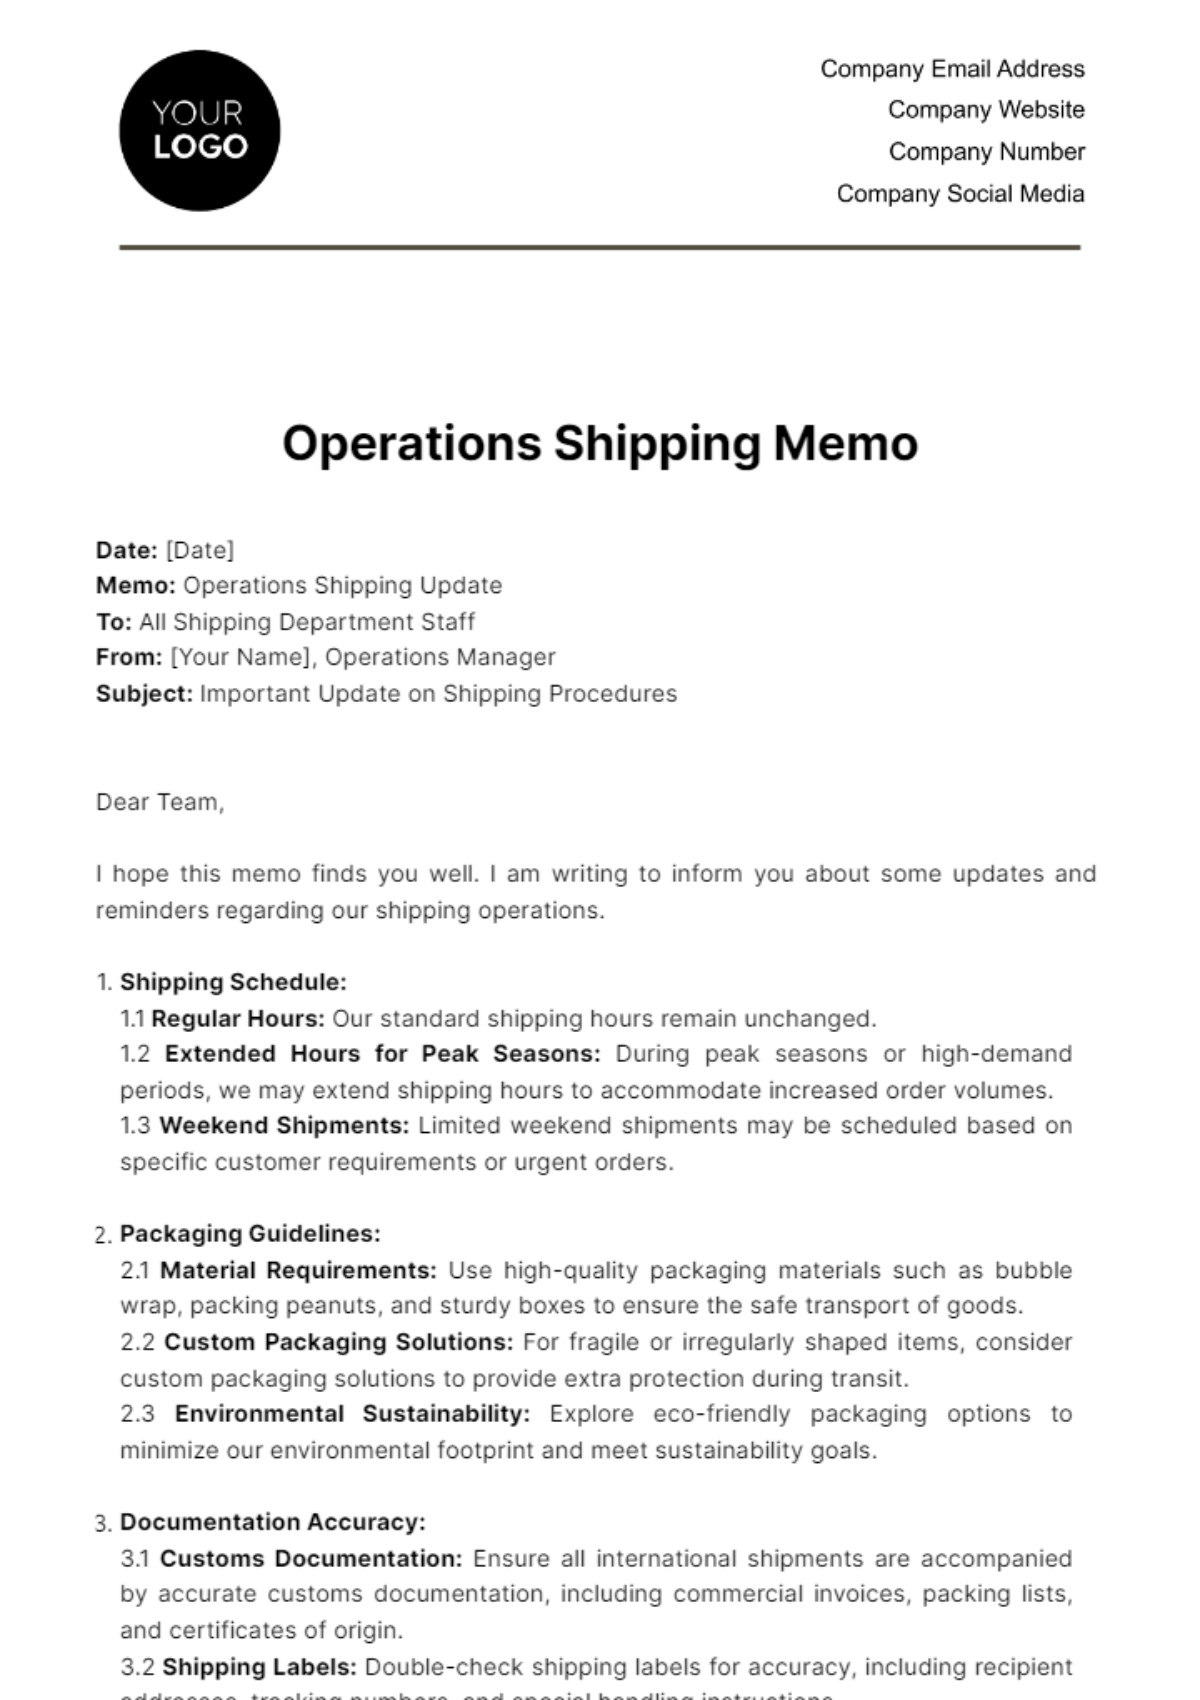 Free Operations Shipping Memo Template